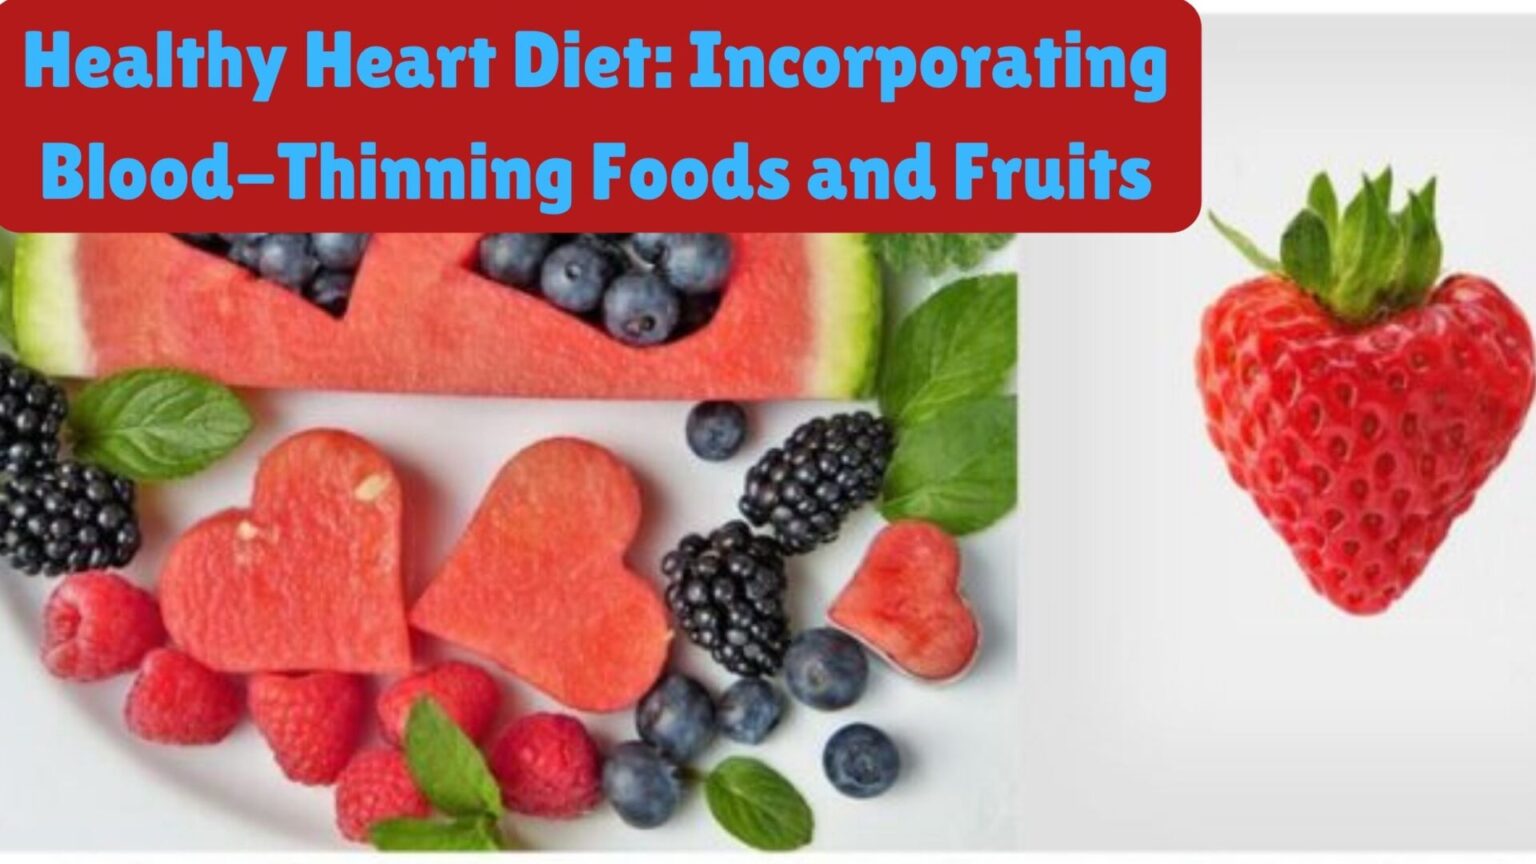 Healthy Heart Diet: Incorporating Blood-Thinning Foods and Fruits